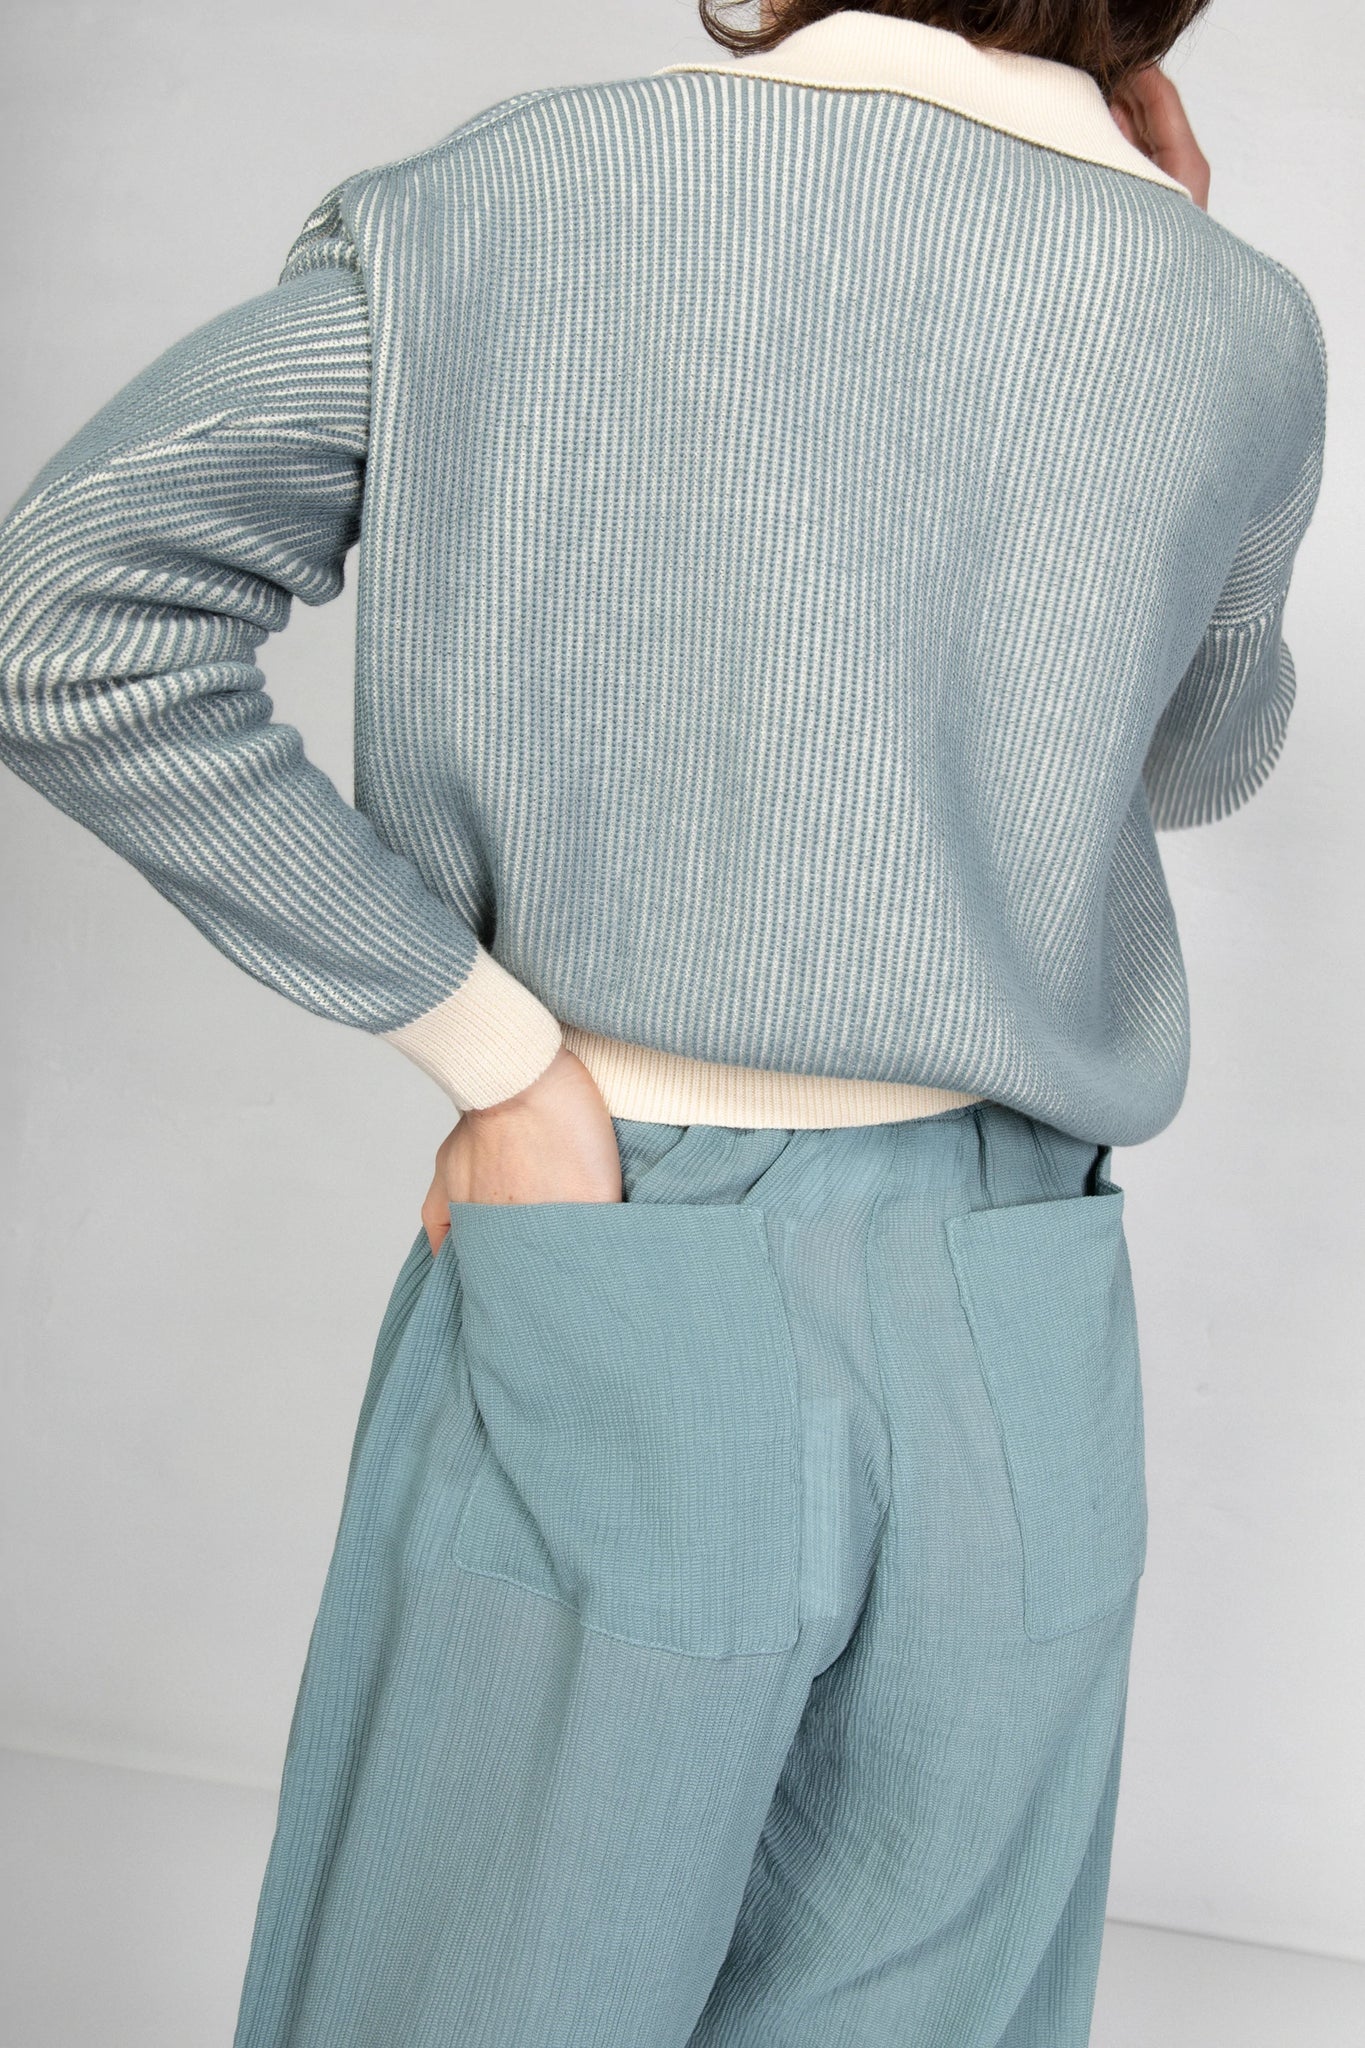 Cropped Polo Jane cotton rib in pale blue/natural by Can Pep Rey